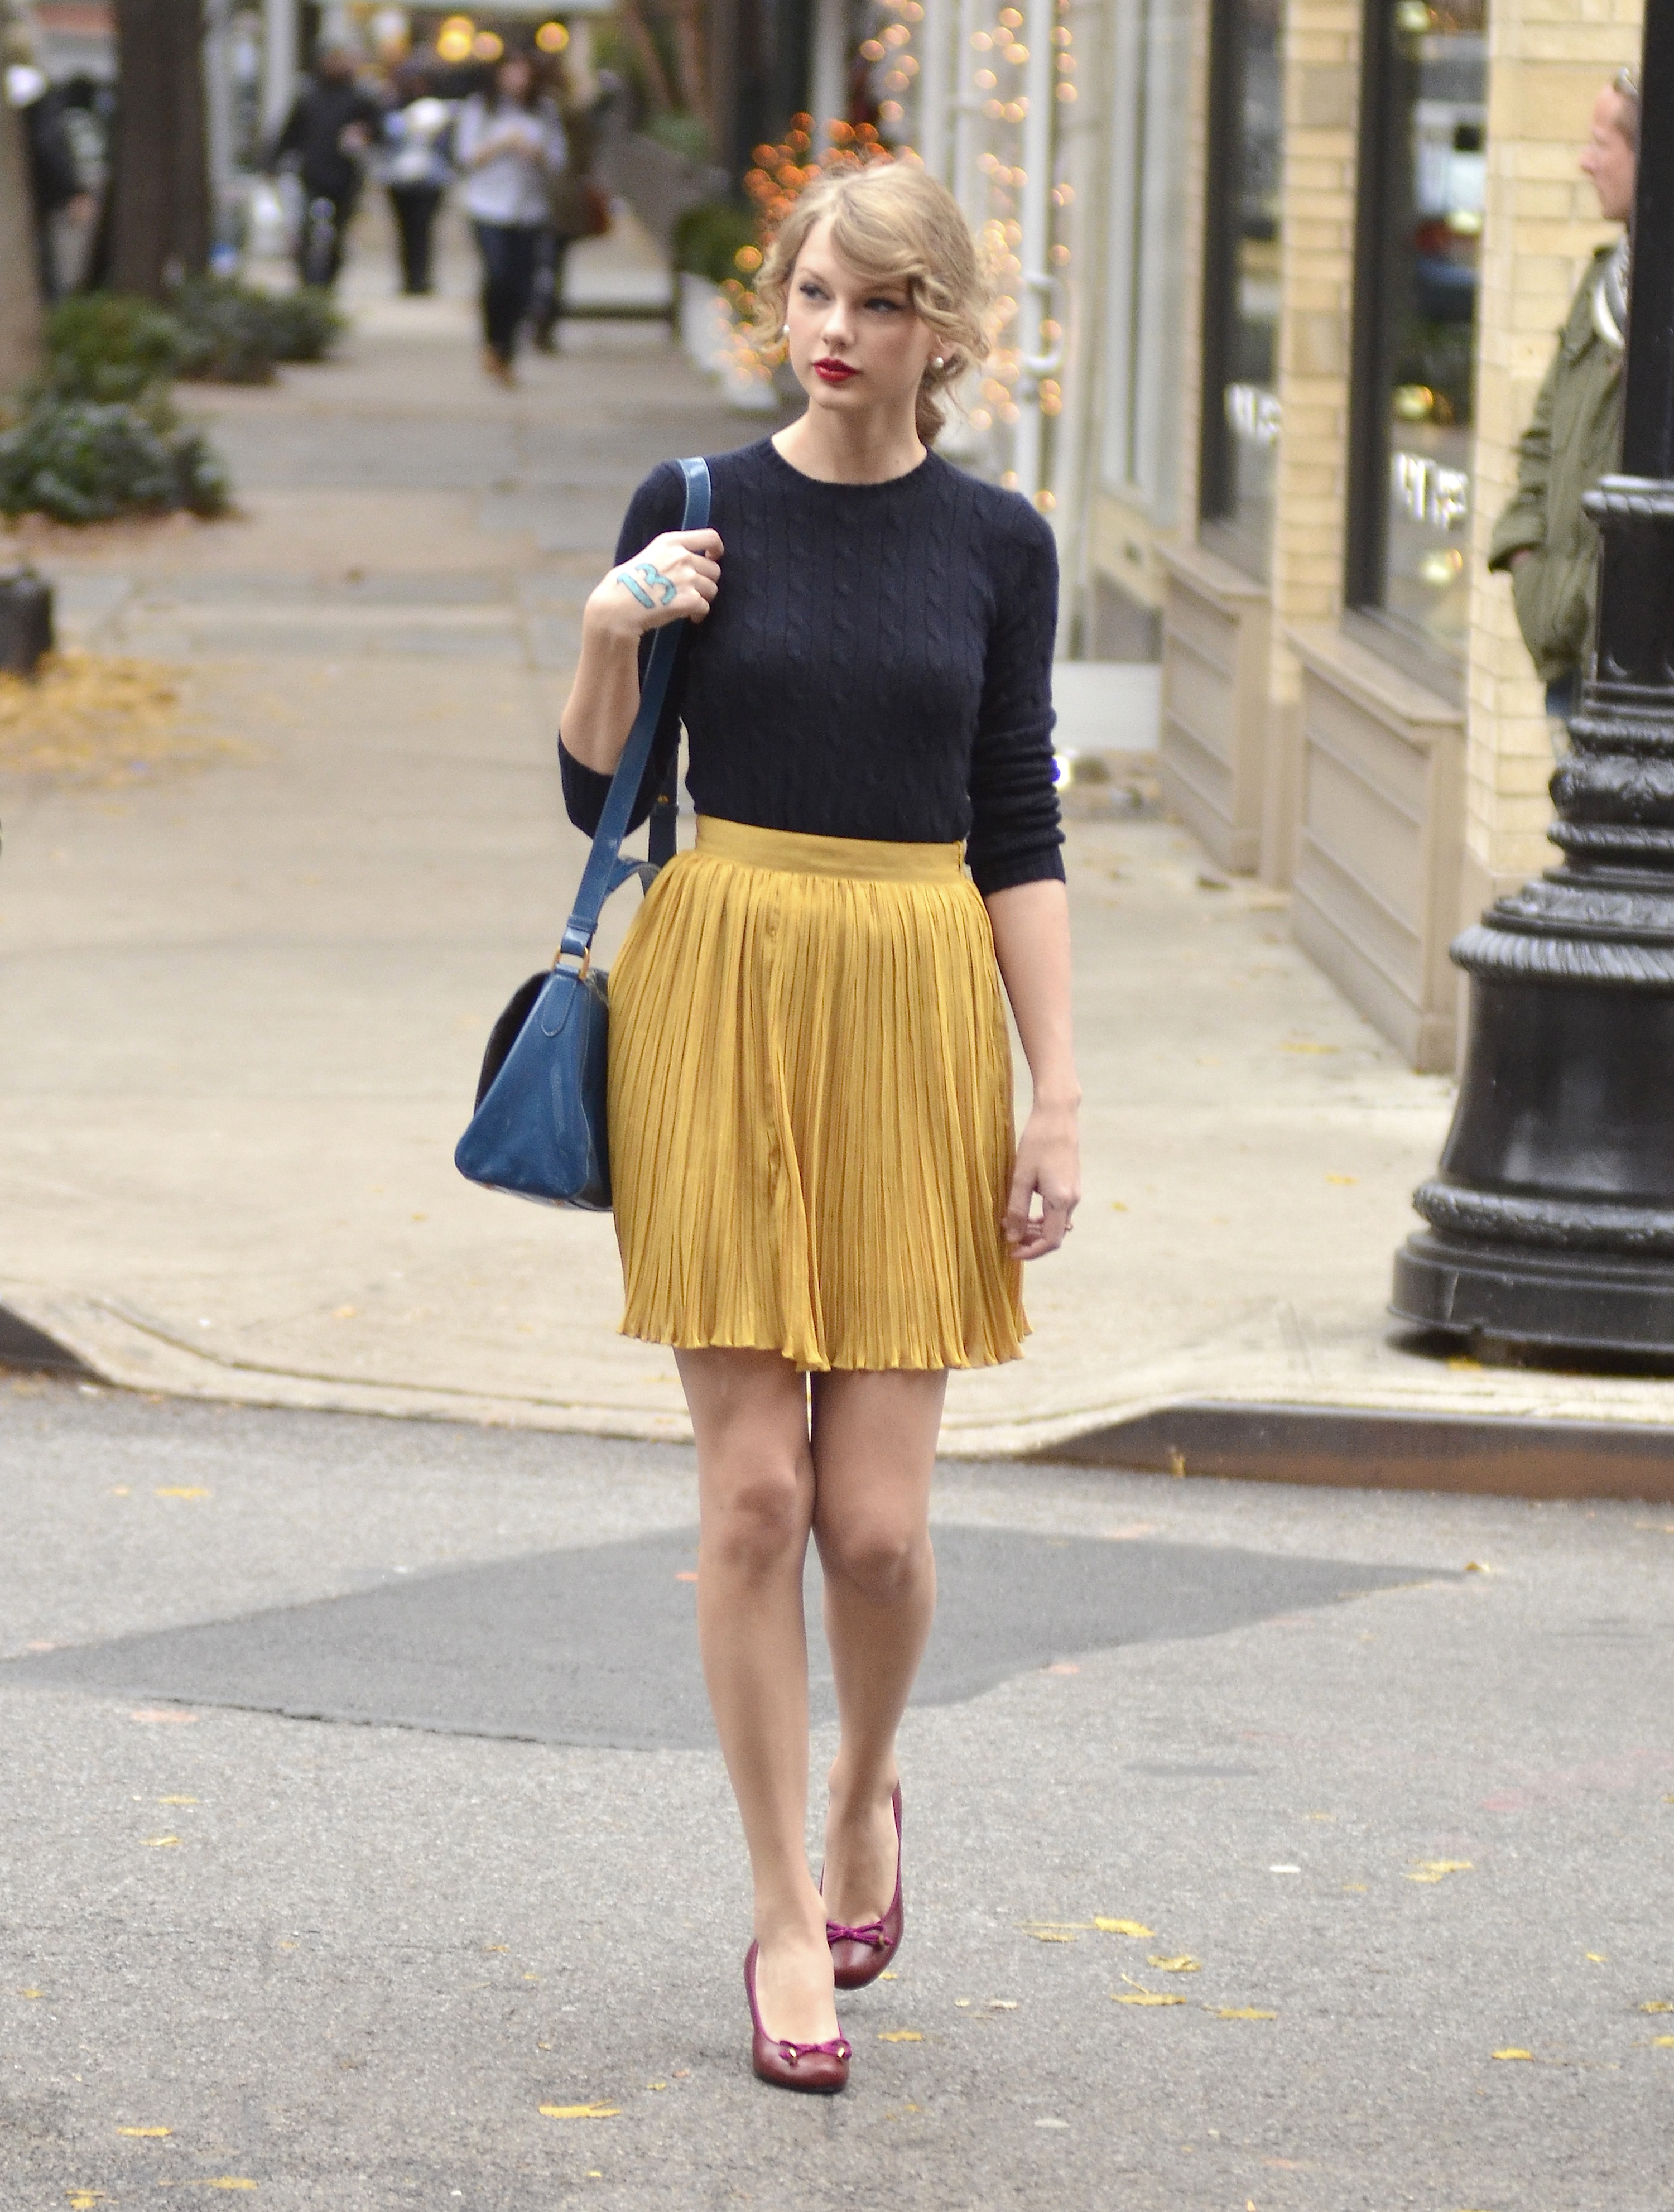 Taylor Swift-Sichtung am 22. November 2011 in New York City.